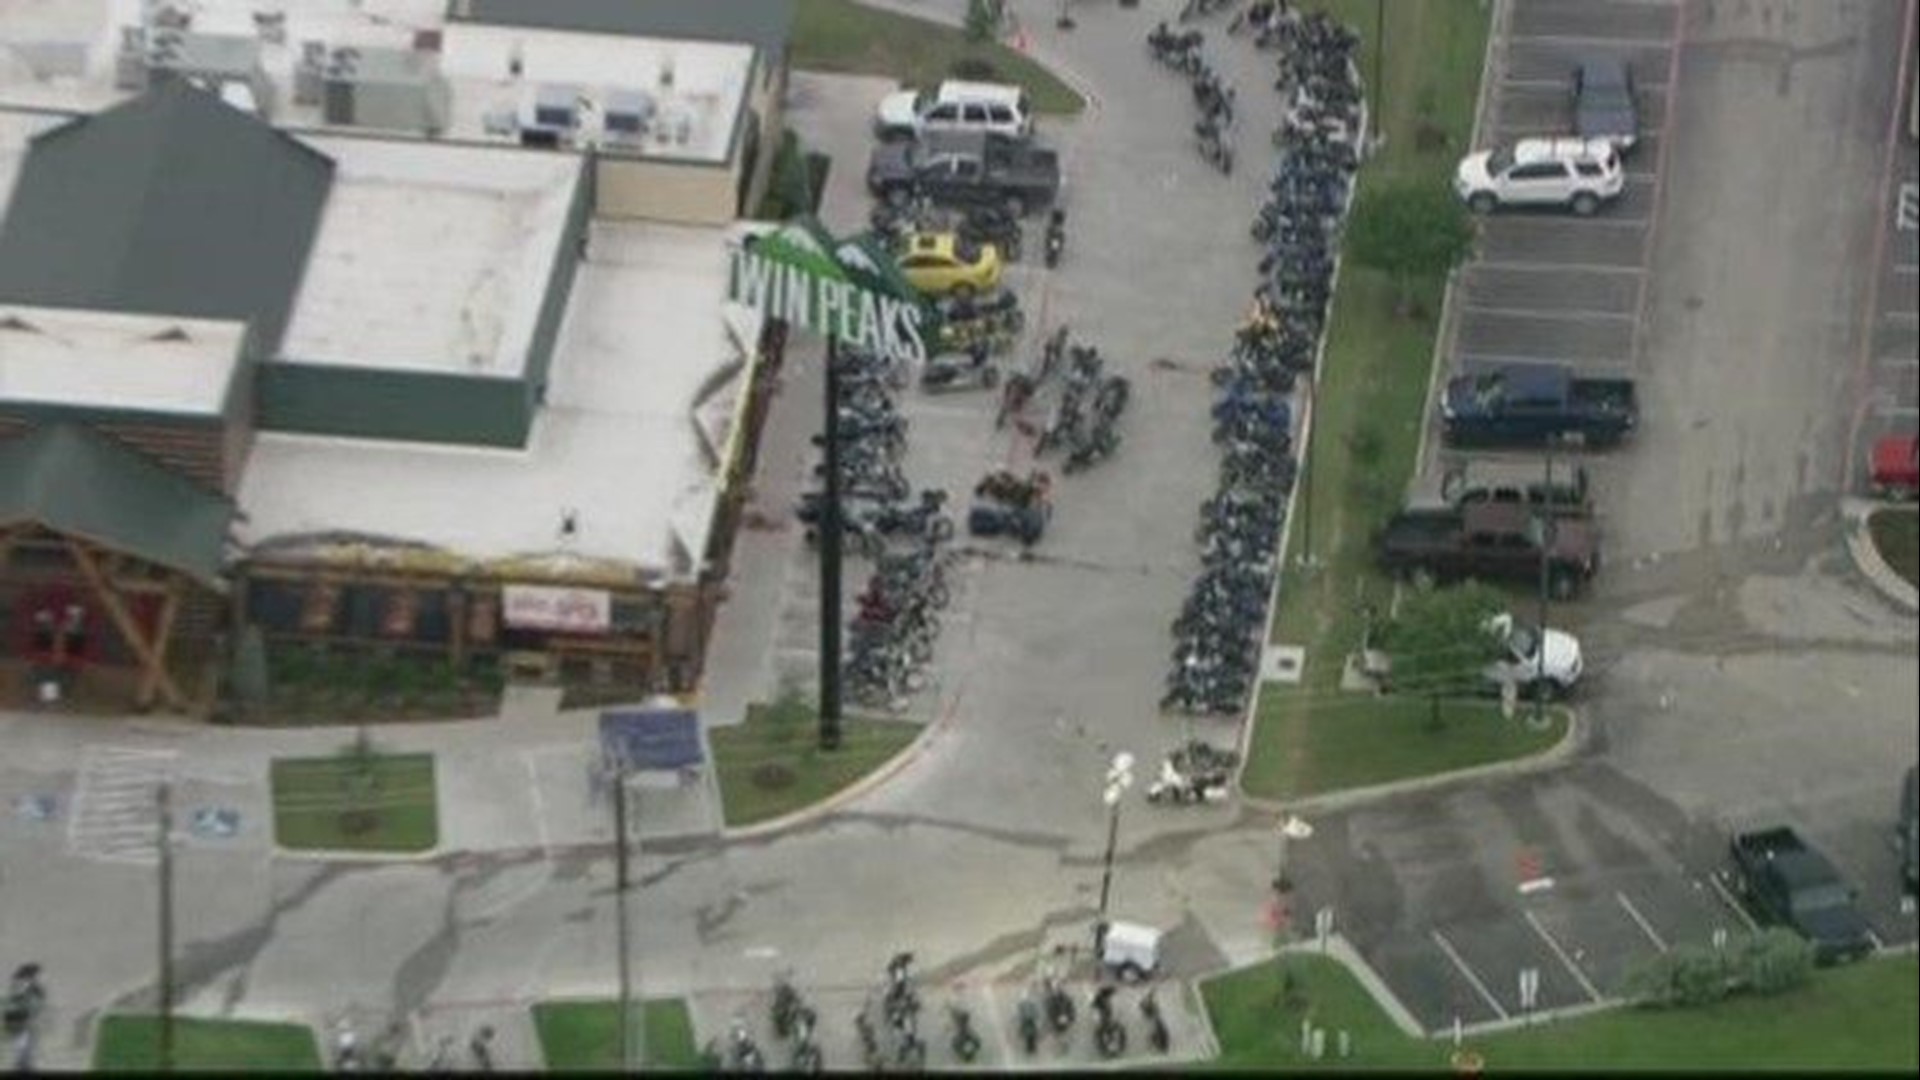 Rival motorcycle groups exchanged fire at the Waco Twin Peaks five years ago May 17. The shootout resulted in nine deaths.